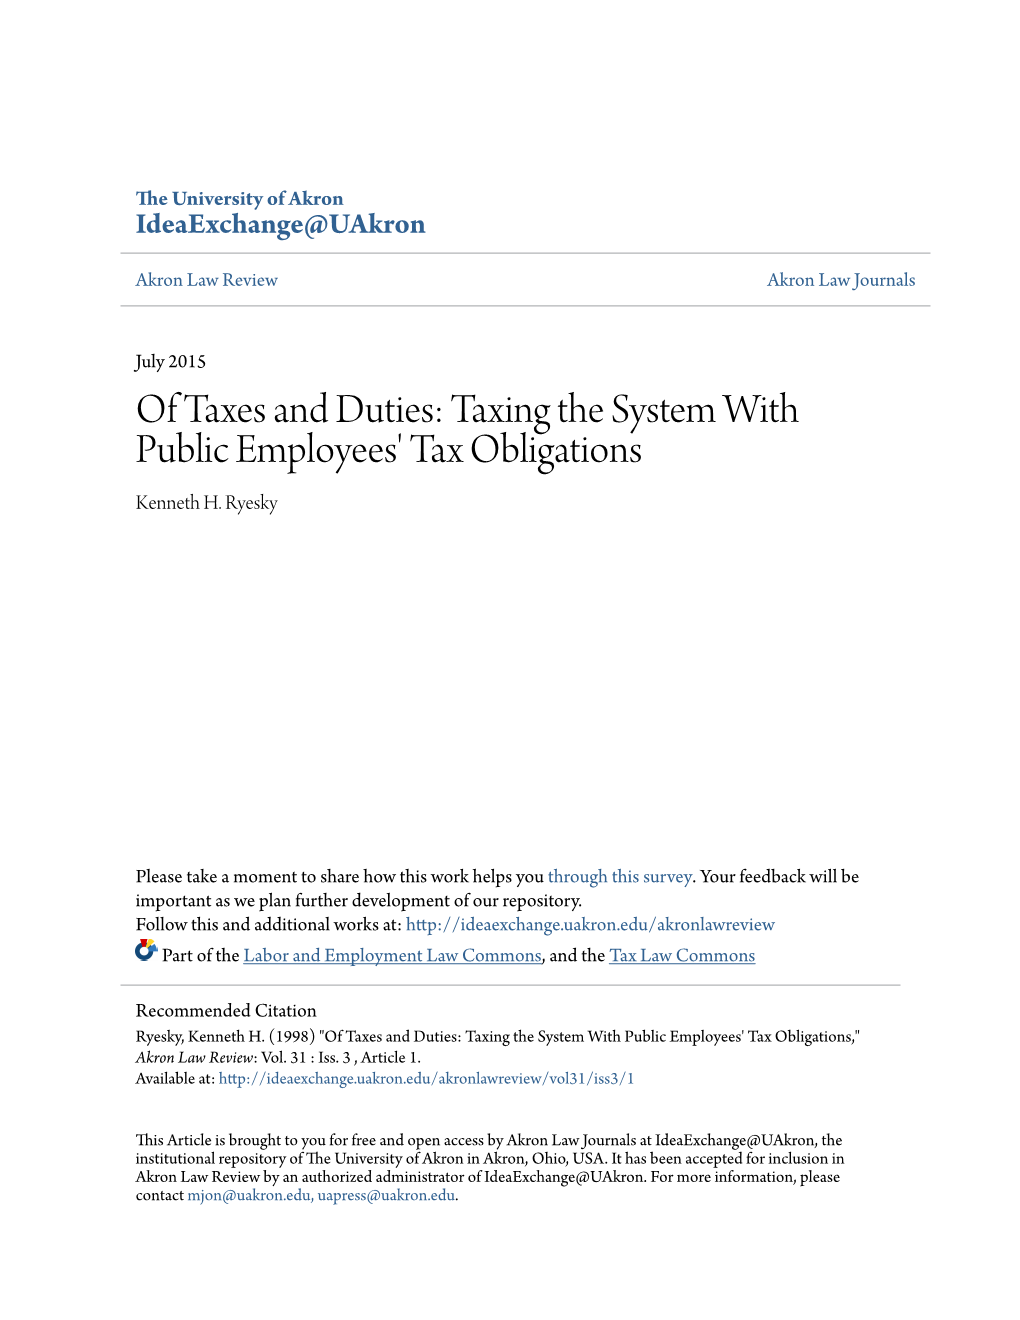 Taxing the System with Public Employees' Tax Obligations Kenneth H